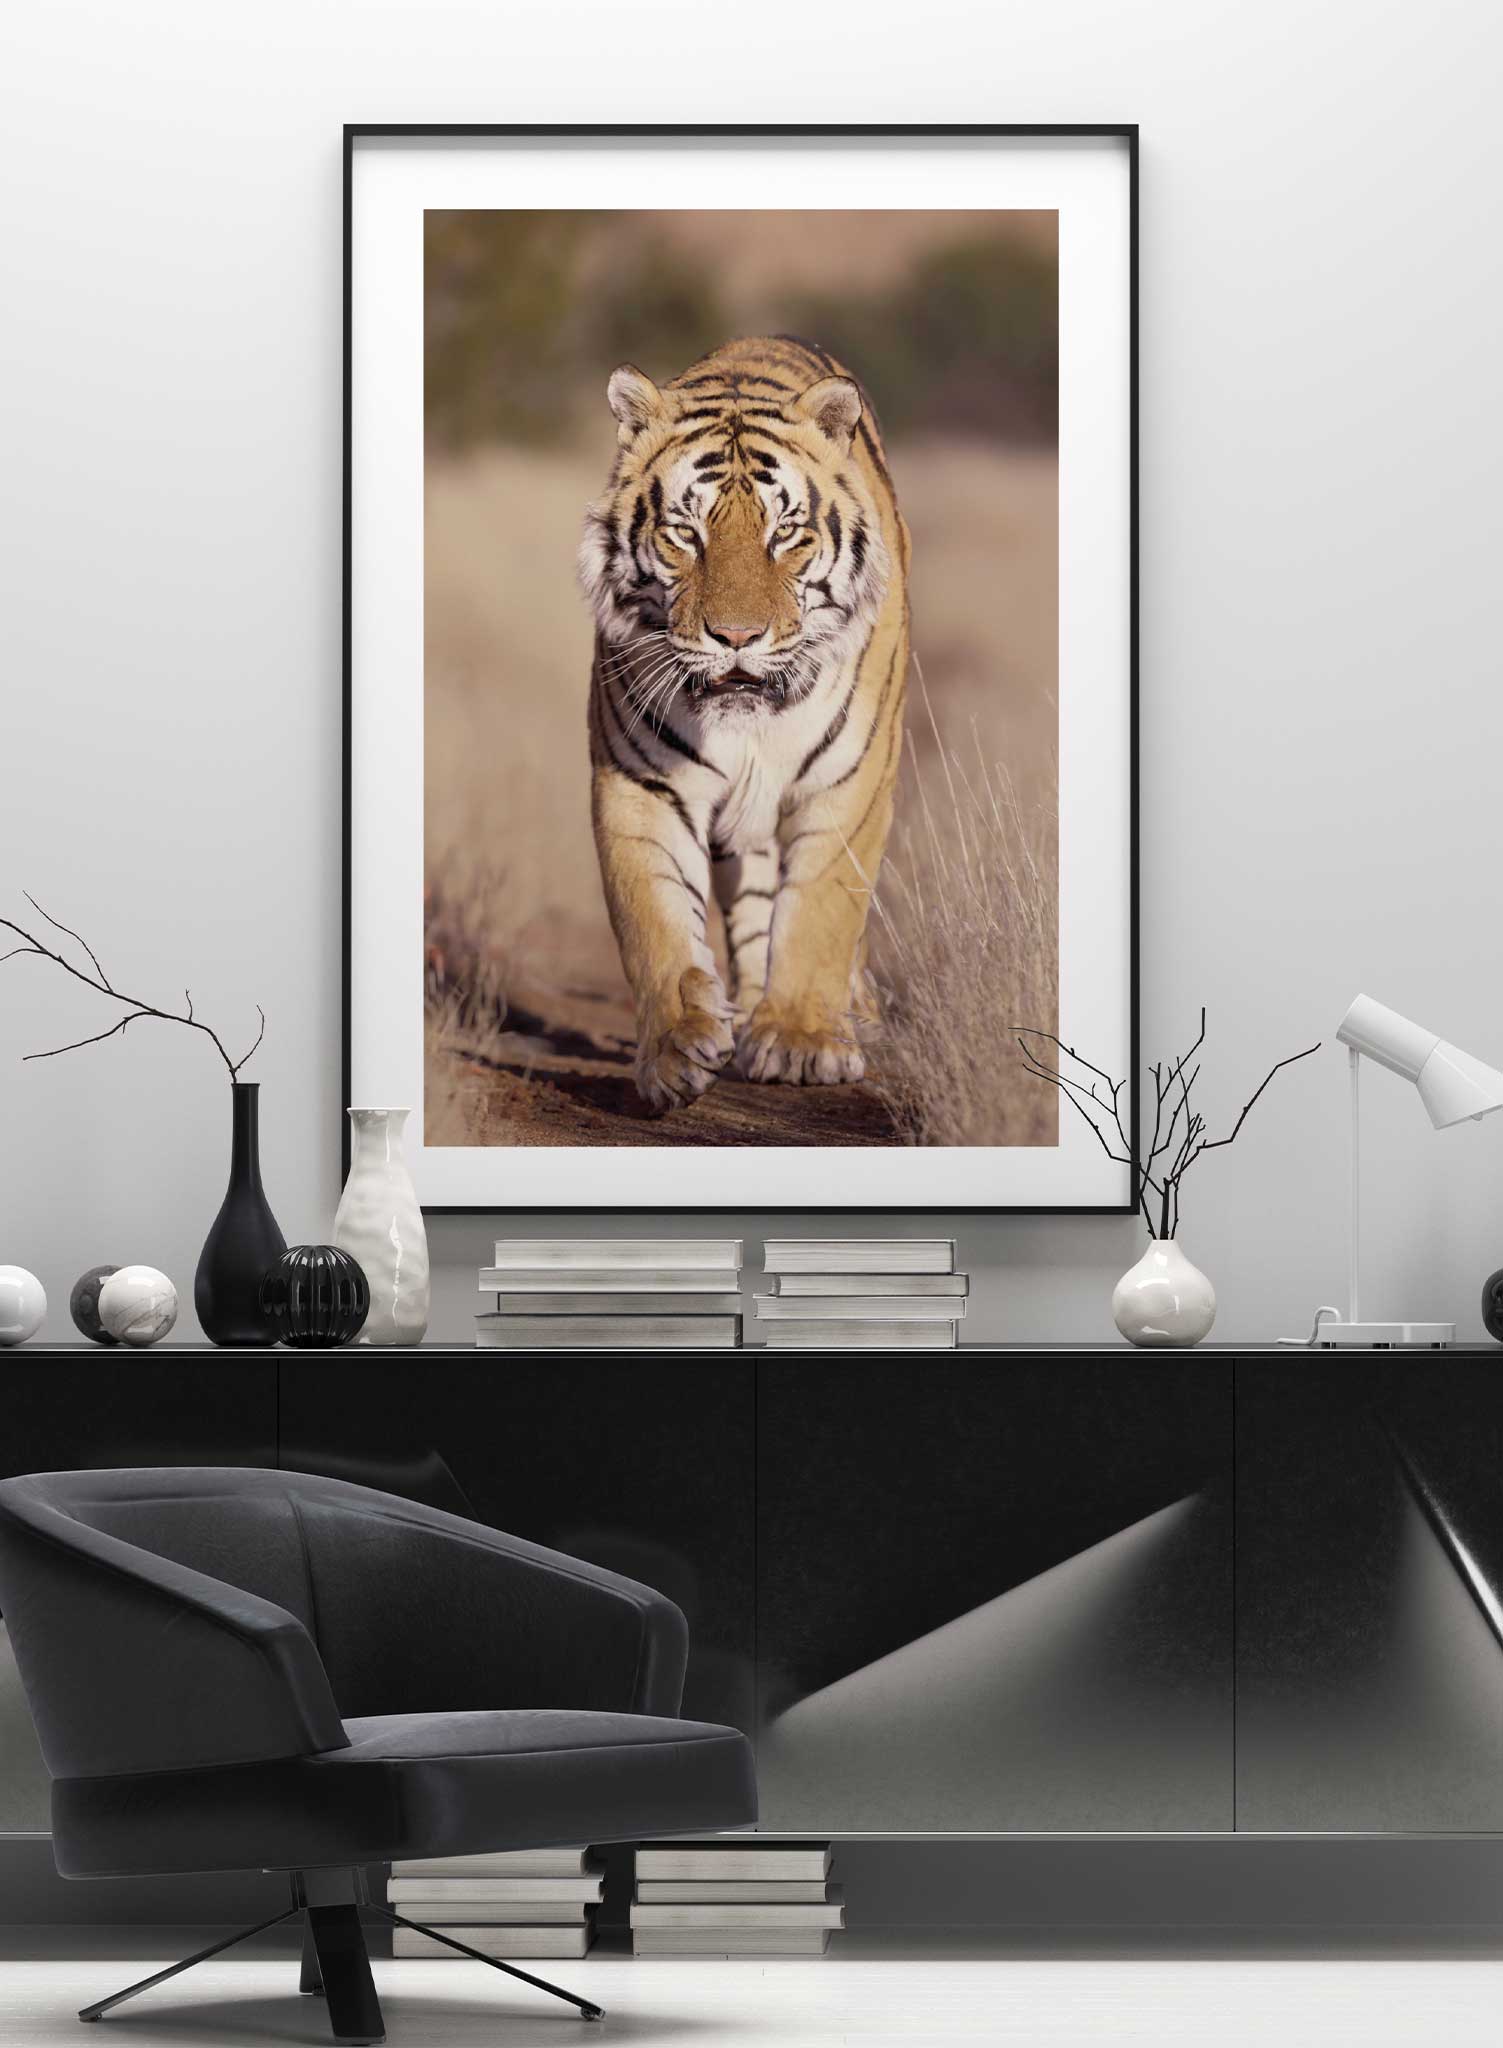 On the Prowl is a minimalist photography of a mighty tiger staring right at the observer as if it is ready to pounce by Opposite Wall.